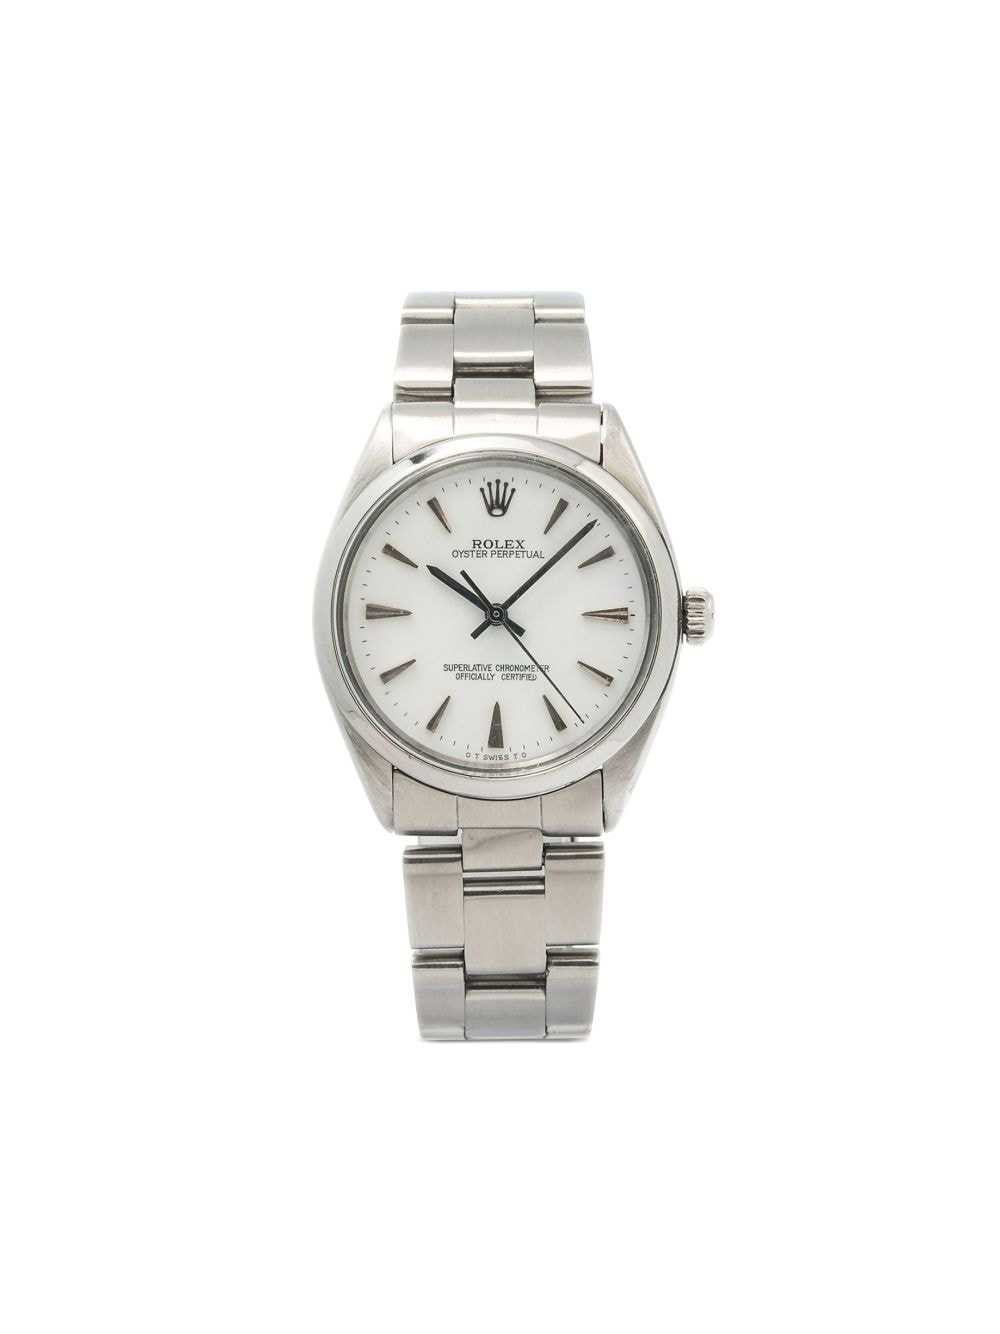 Rolex pre-owned Oyster Perpetual 34mm - White - image 1